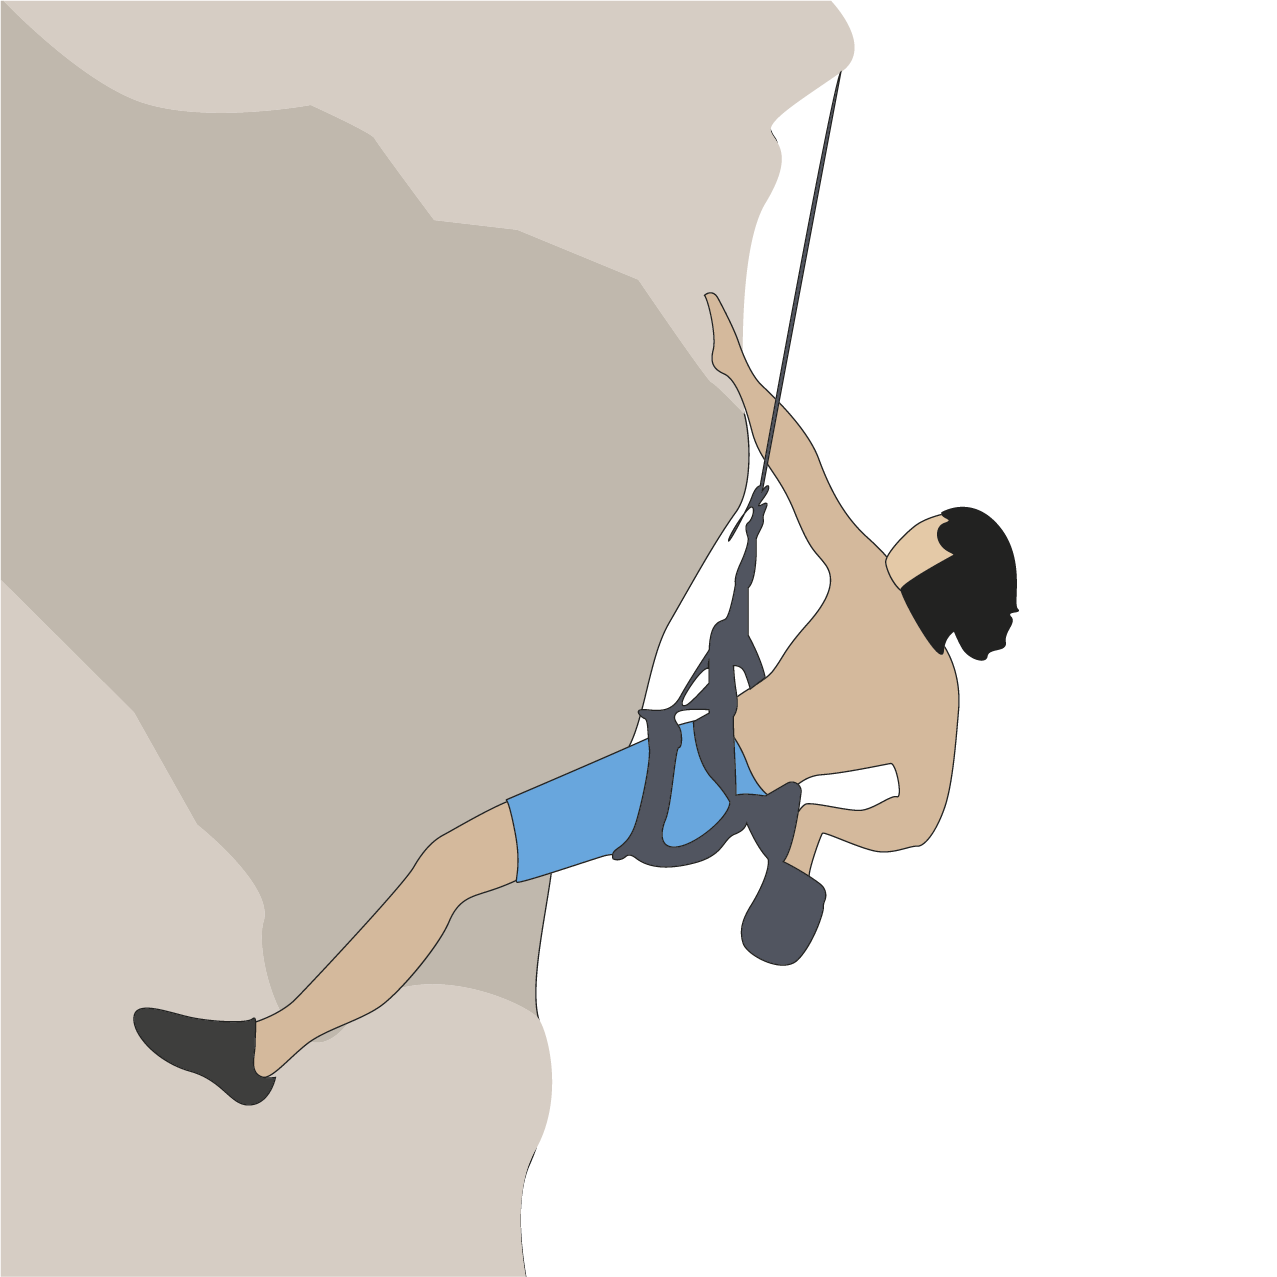 Climber man climb on rock with rope By 09910190